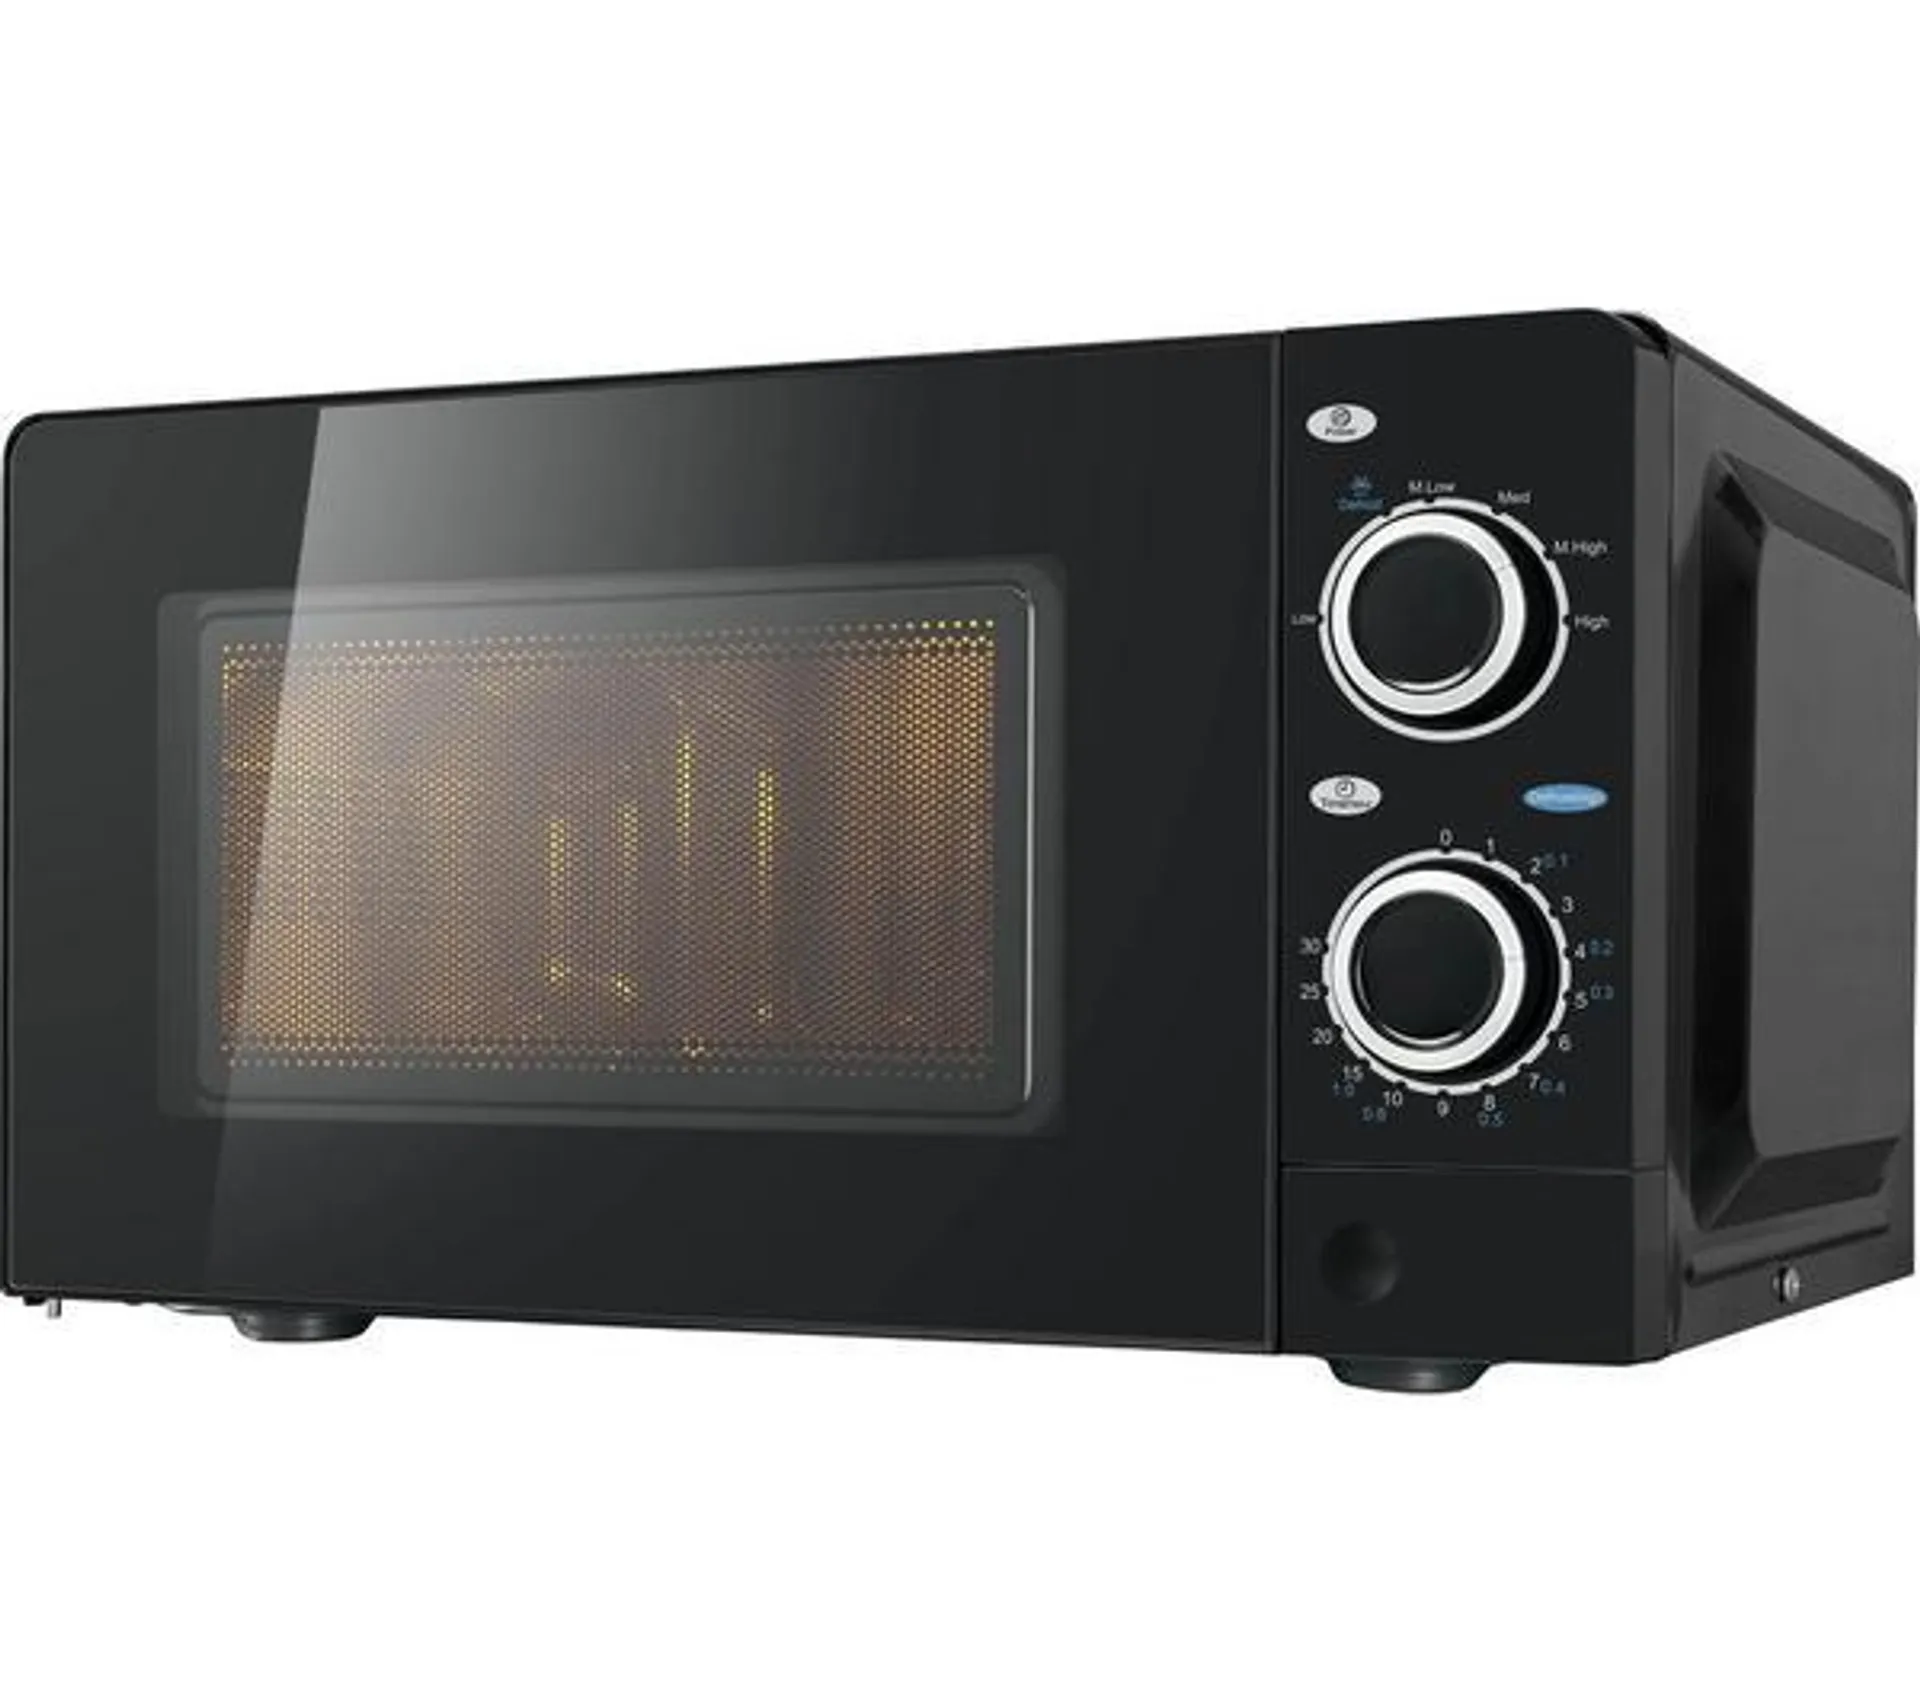 ESSENTIALS CMB21 Compact Solo Microwave - Black